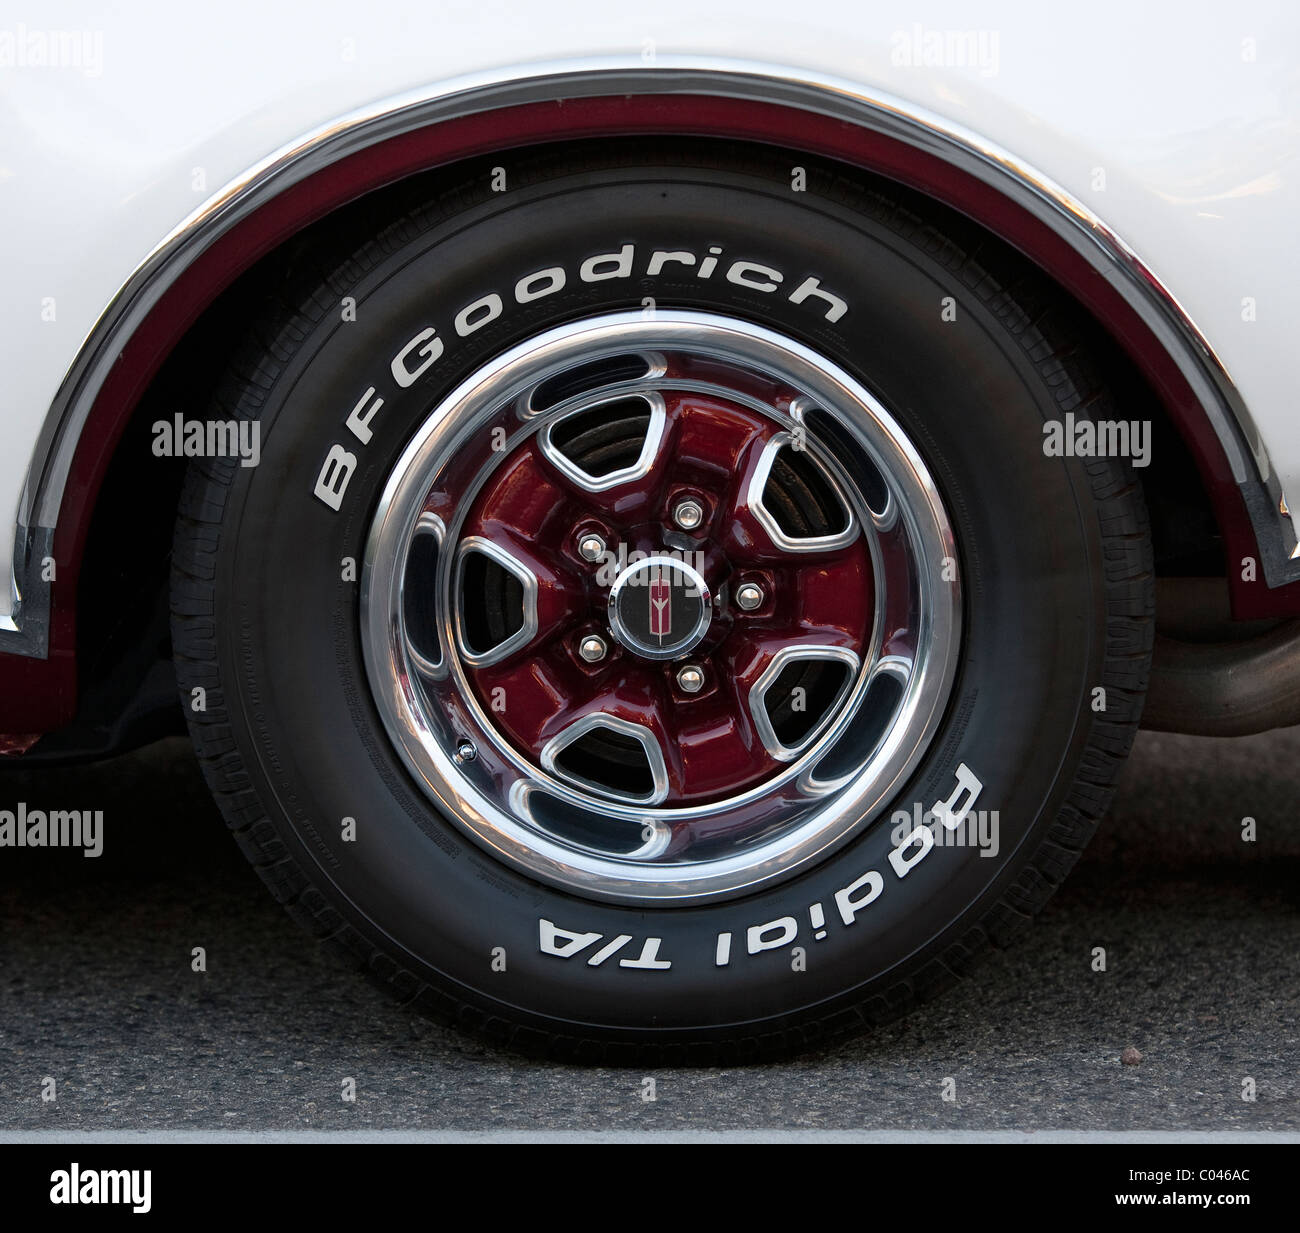 Bfgoodrich High Resolution Stock Photography and Images - Alamy